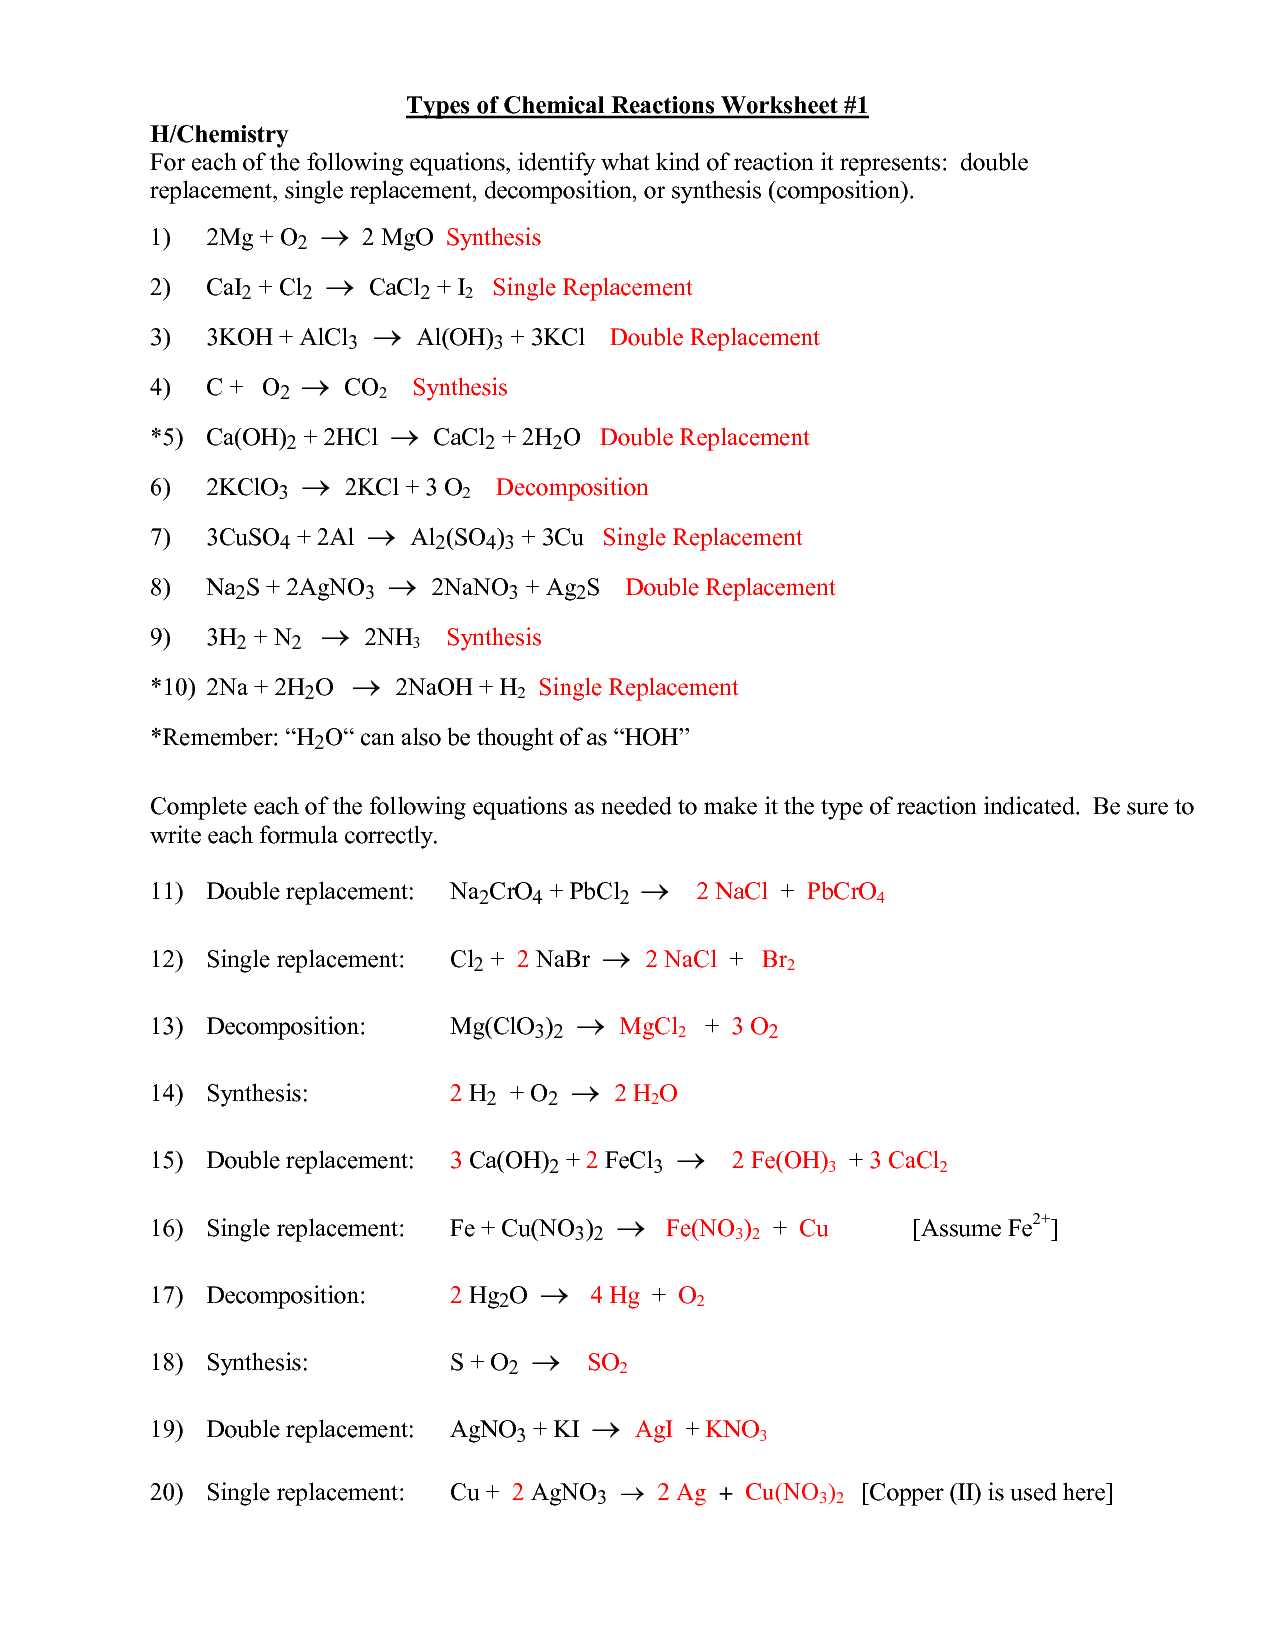 Forces Worksheet 1 Answer Key or Printables Types Chemical Reactions Worksheet Answers Of Chemical